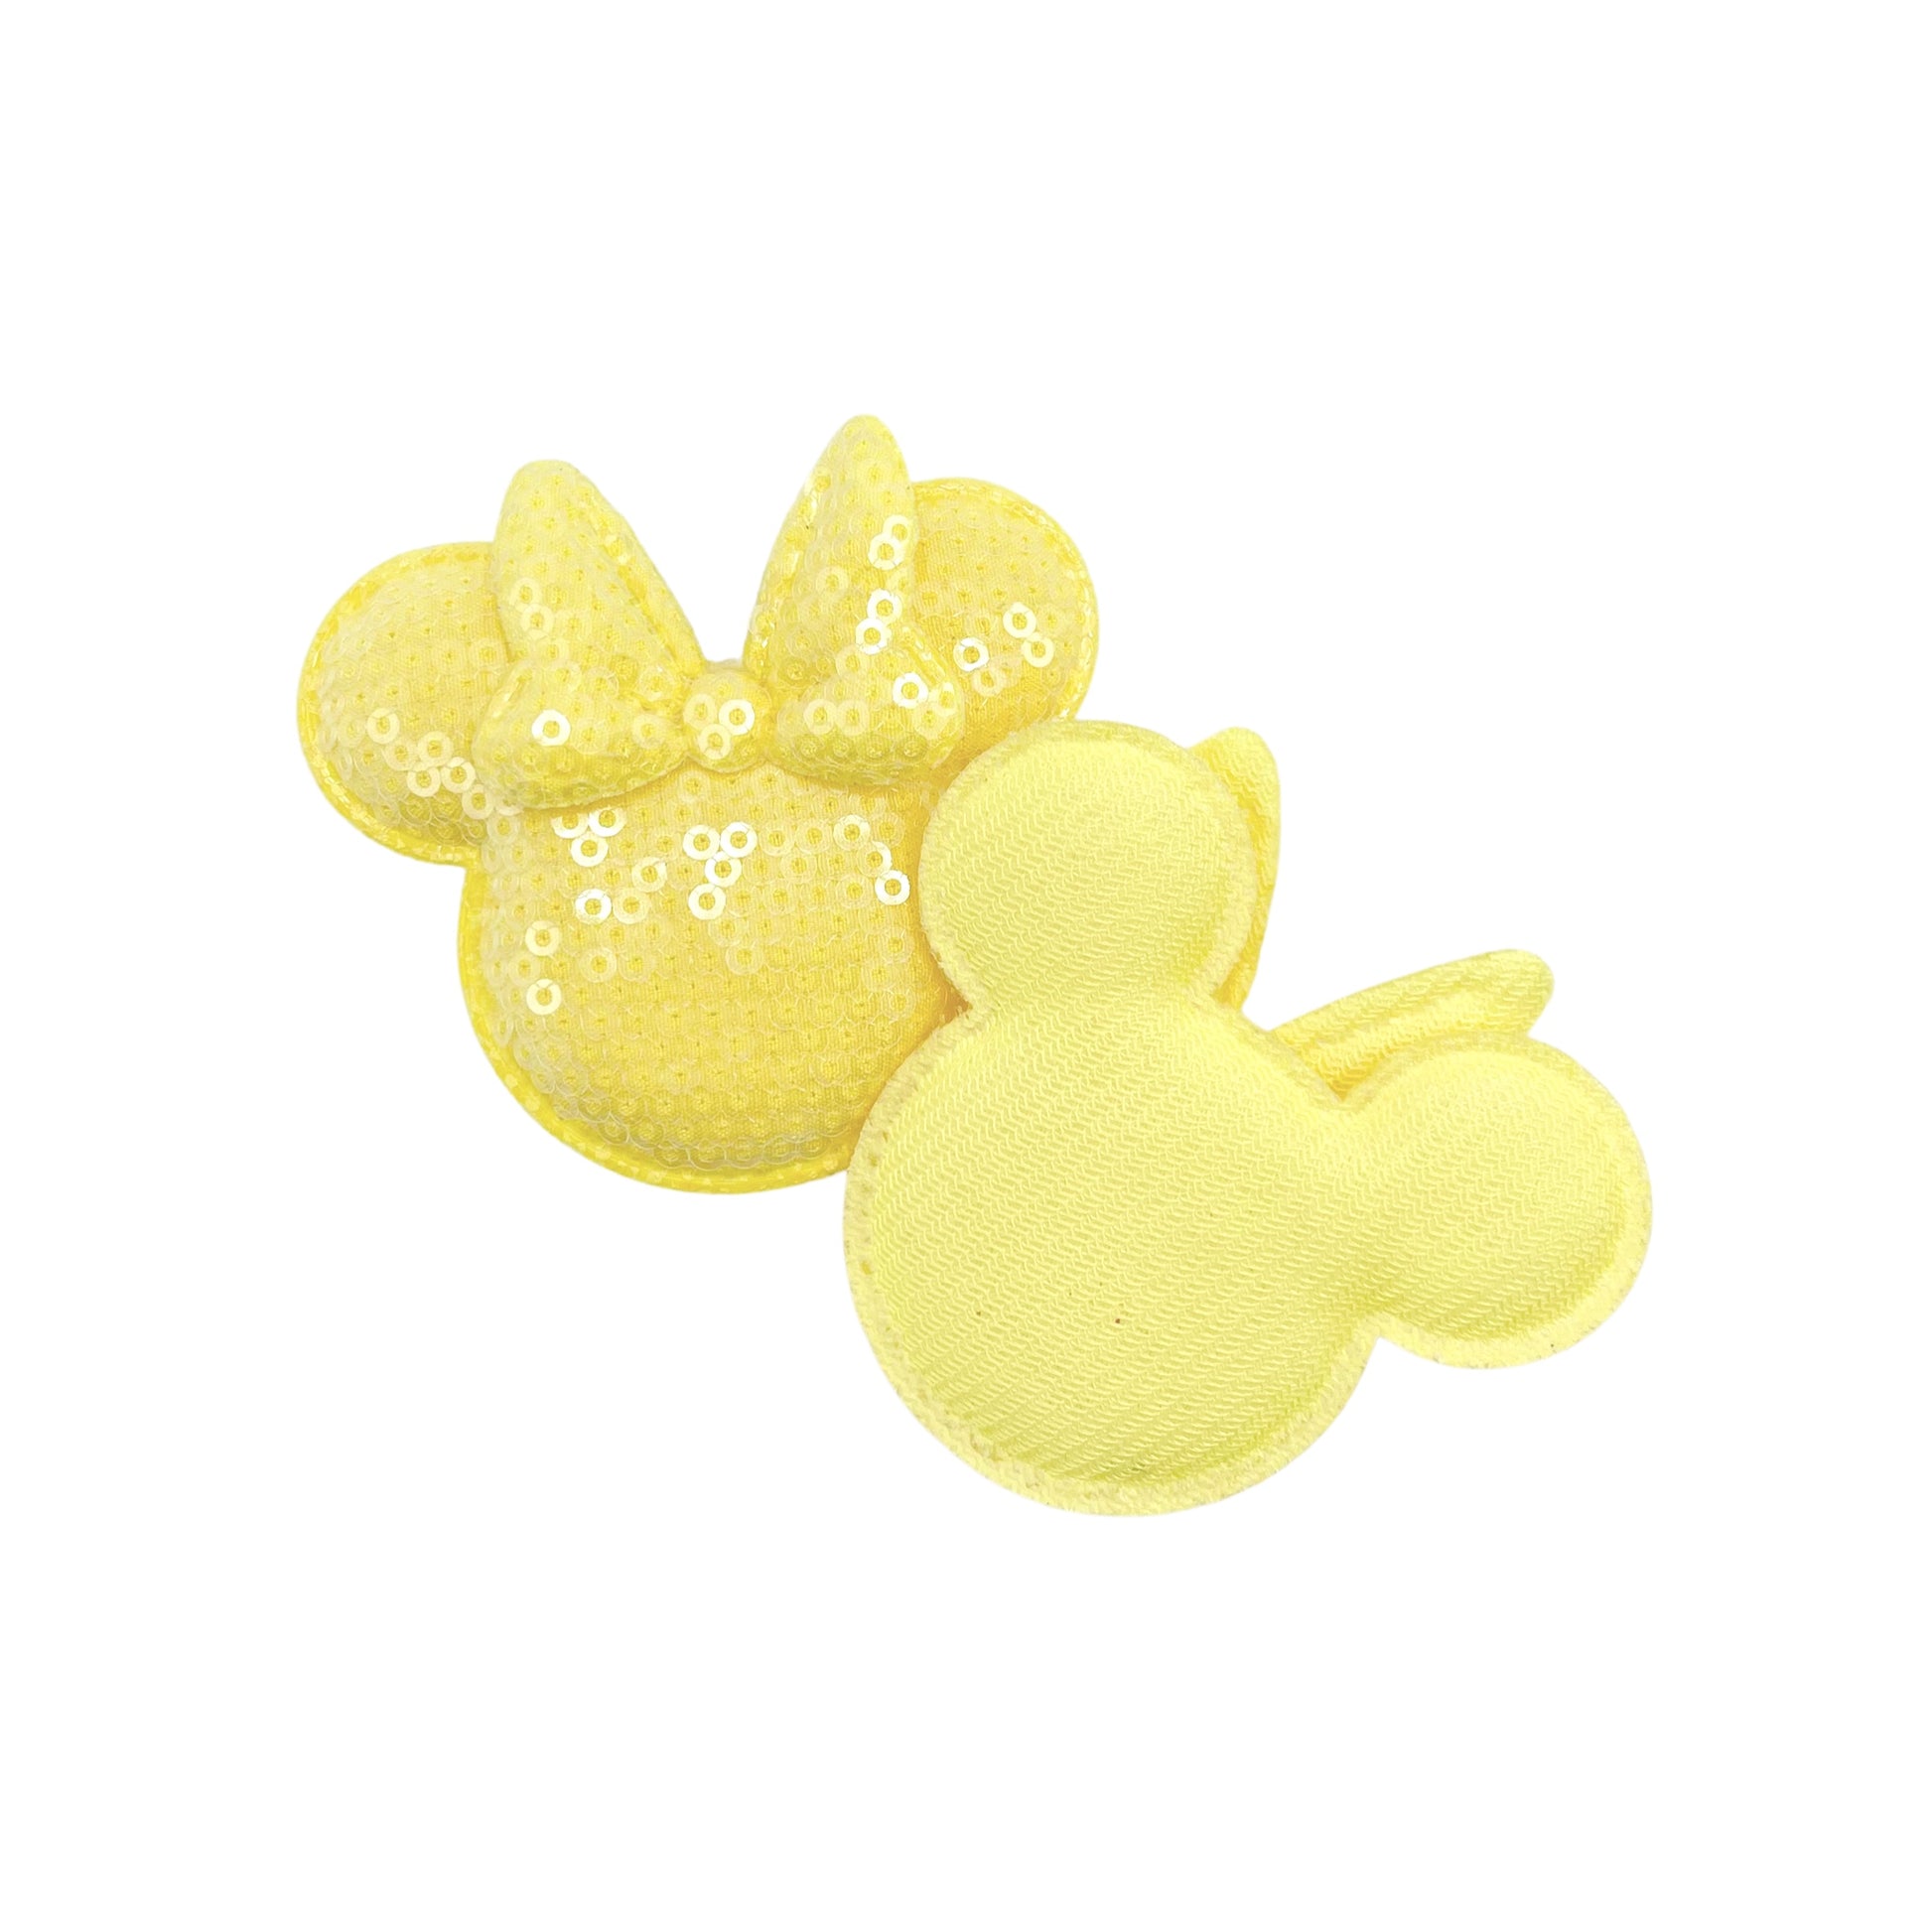 Clear sequins on light yellow mouse head embellishment